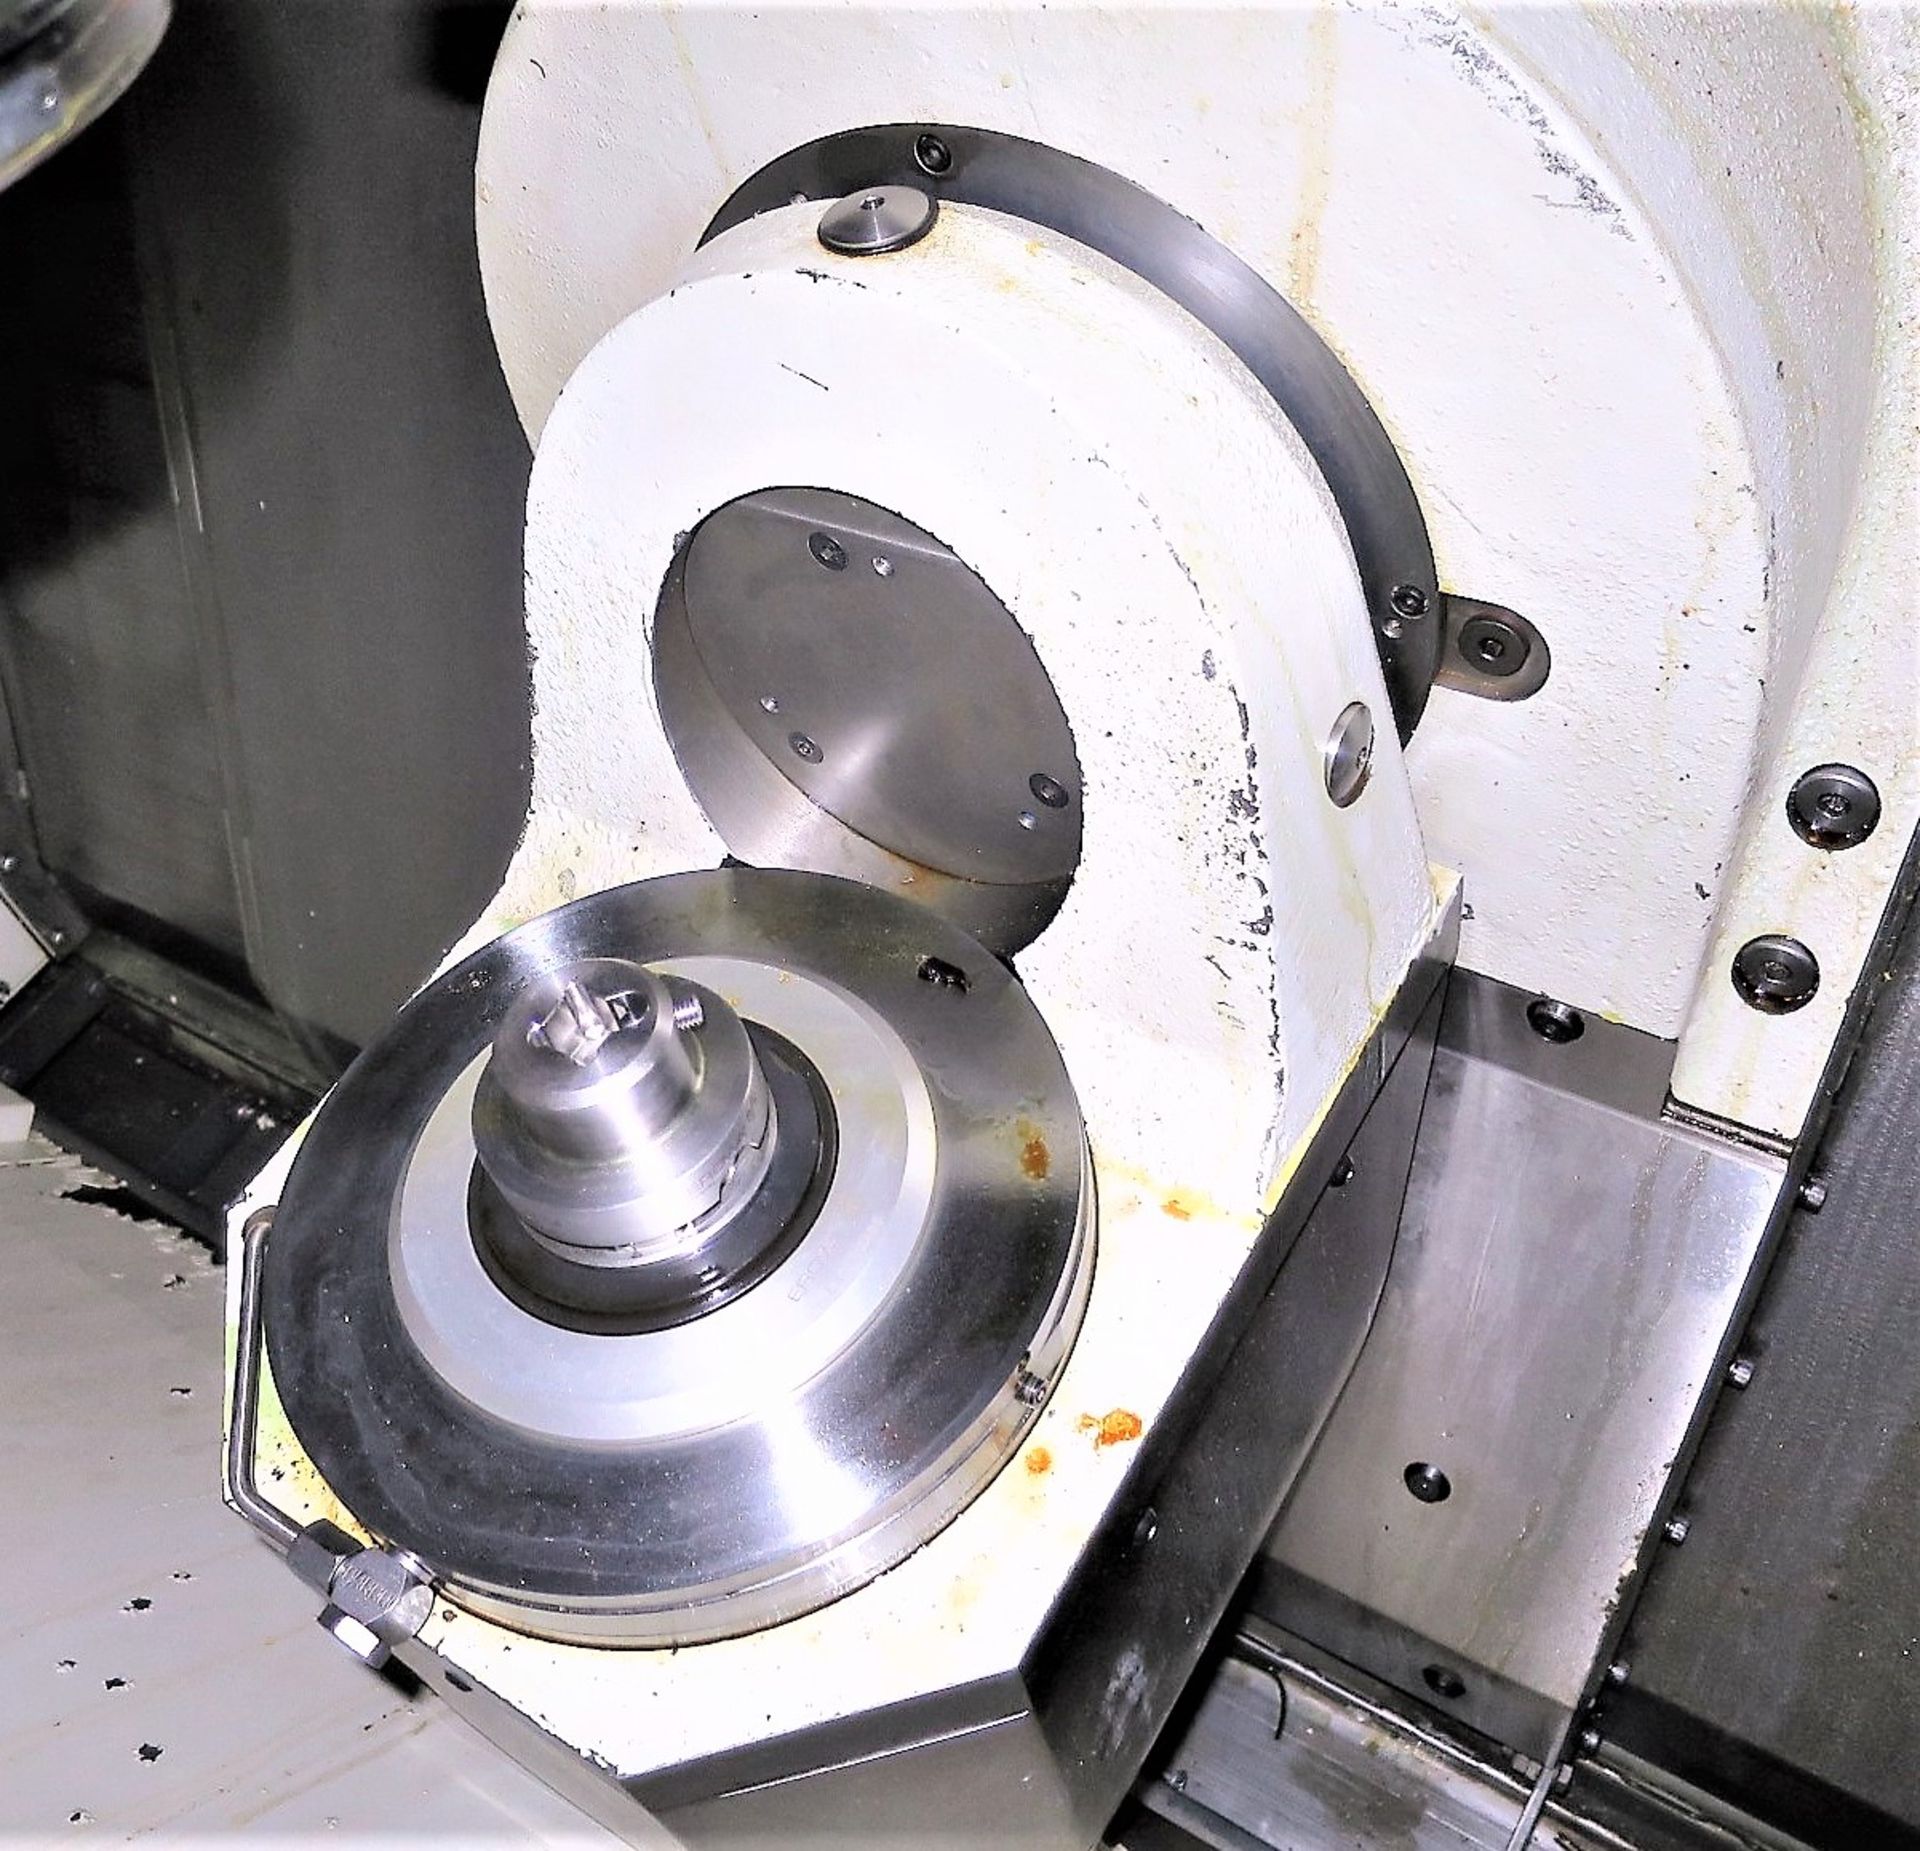 MIKRON HSM-400U HIGH SPEED 5-AXIS CNC VERTICAL MACHINING CENTER, 42,000 RPM, - Image 3 of 8